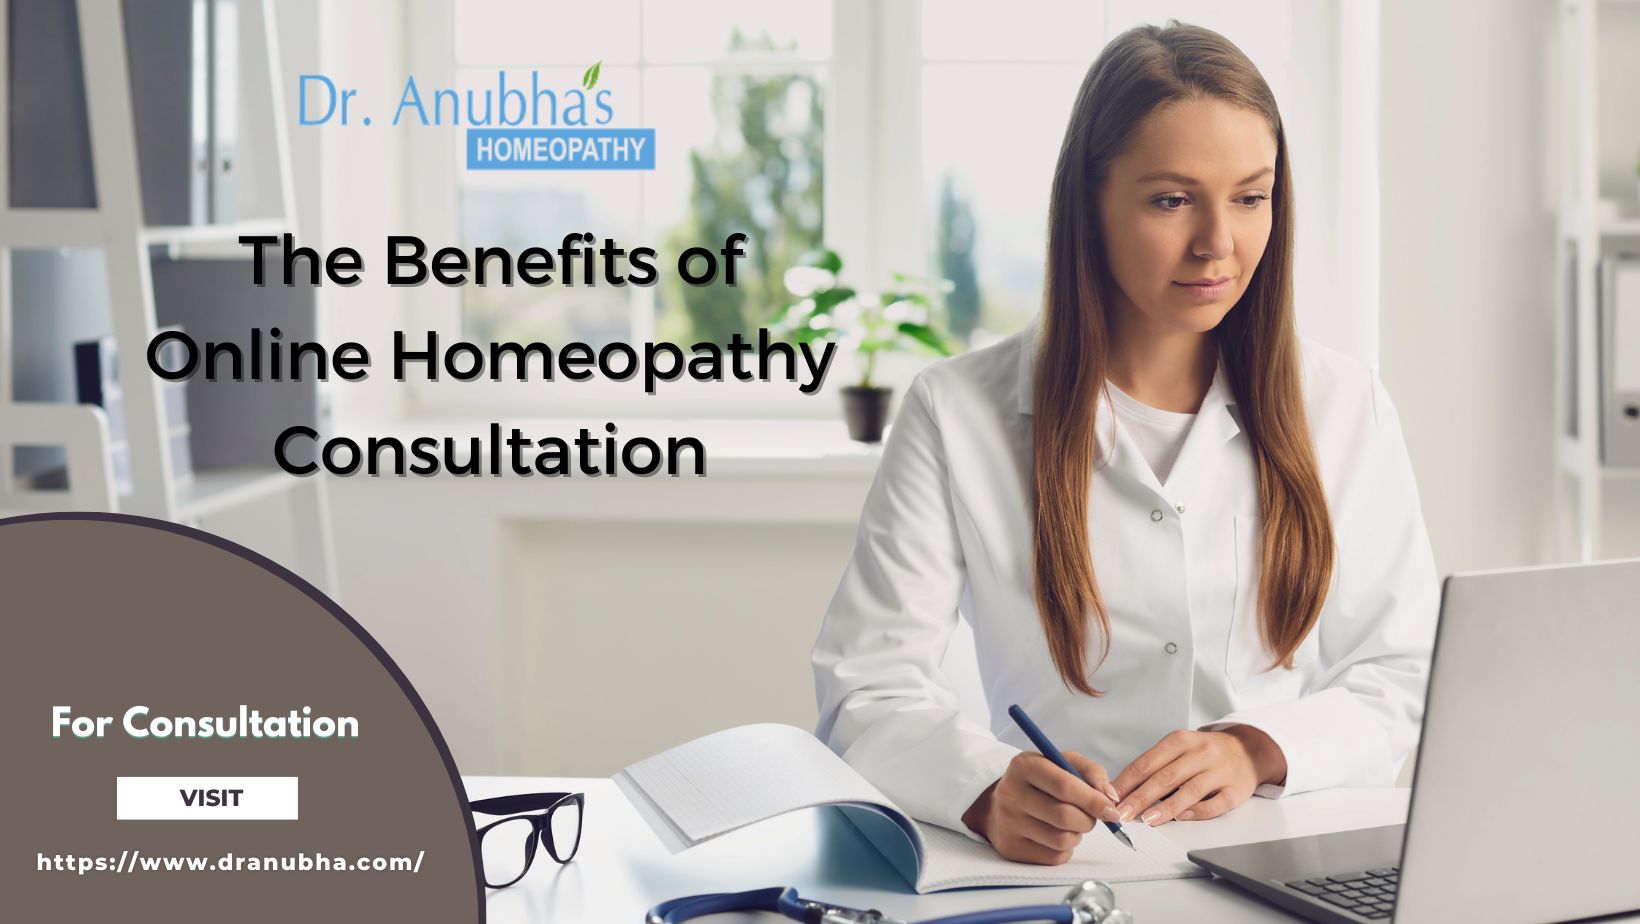 Online Homeopathy Consultation